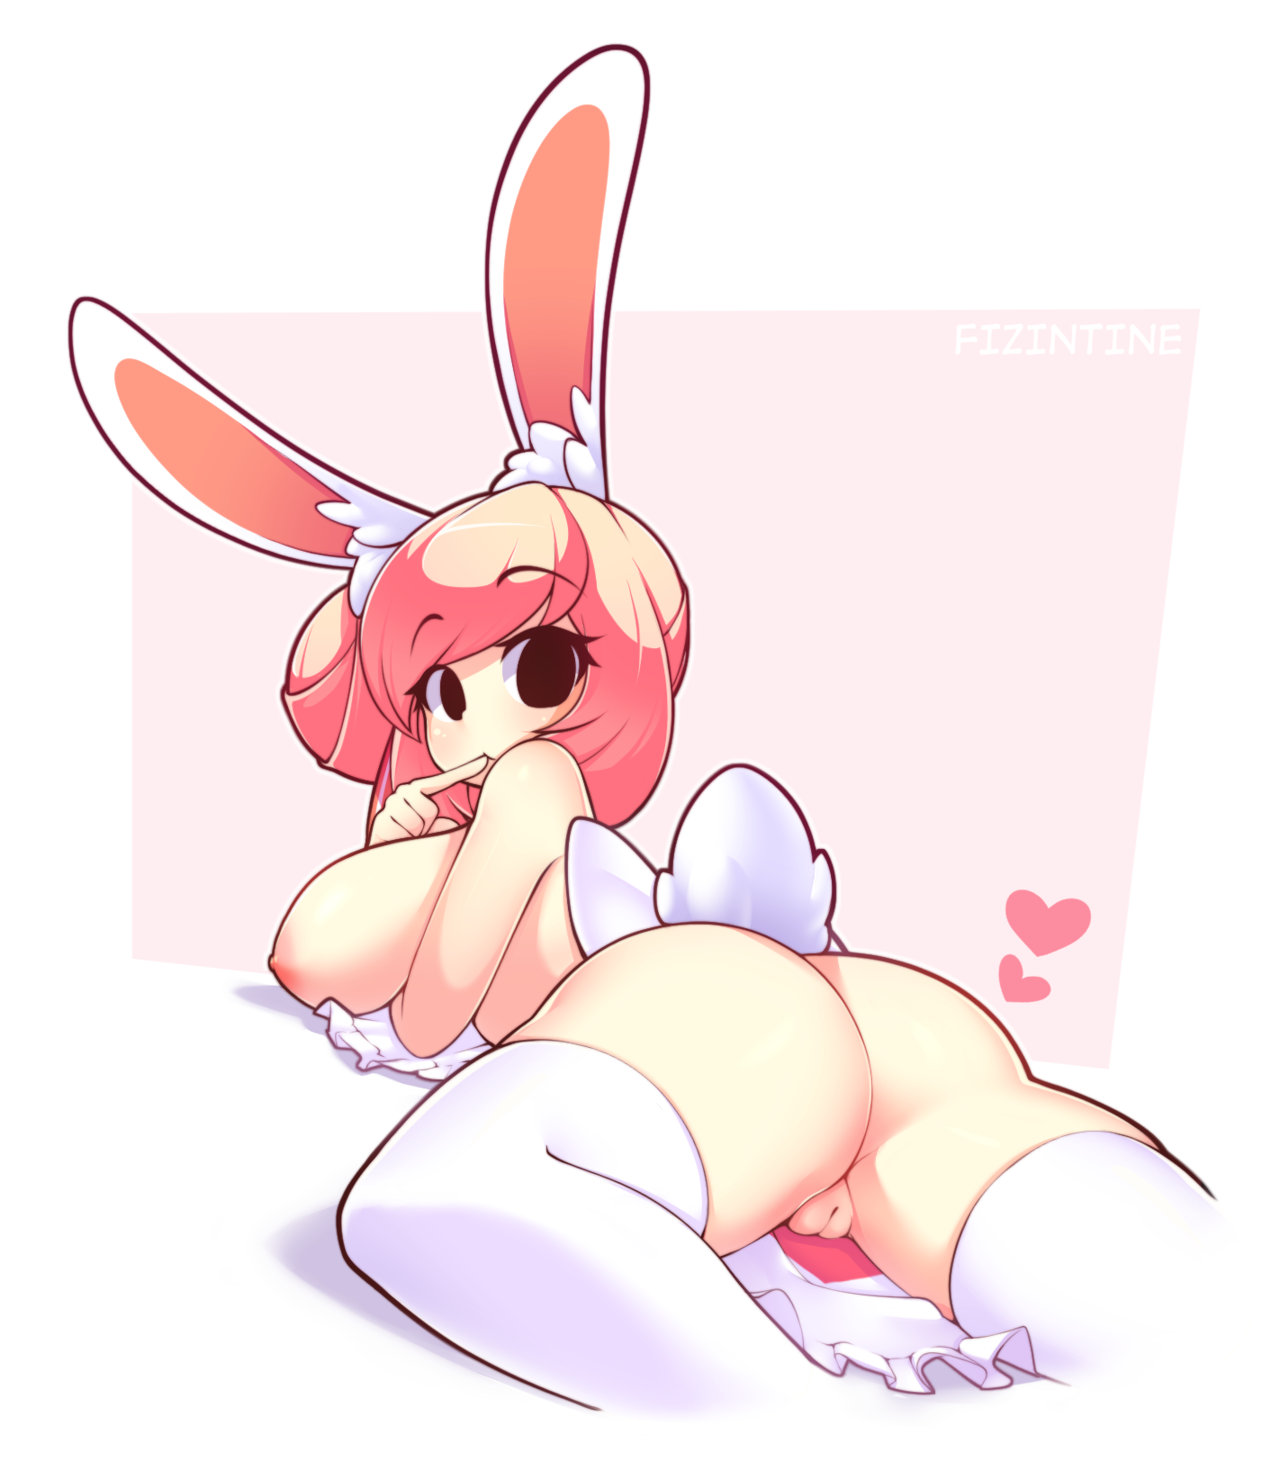 grimphantom2: tewitochi: Hi! Fiz is back with some sweets! ~♥ Cute bunny 